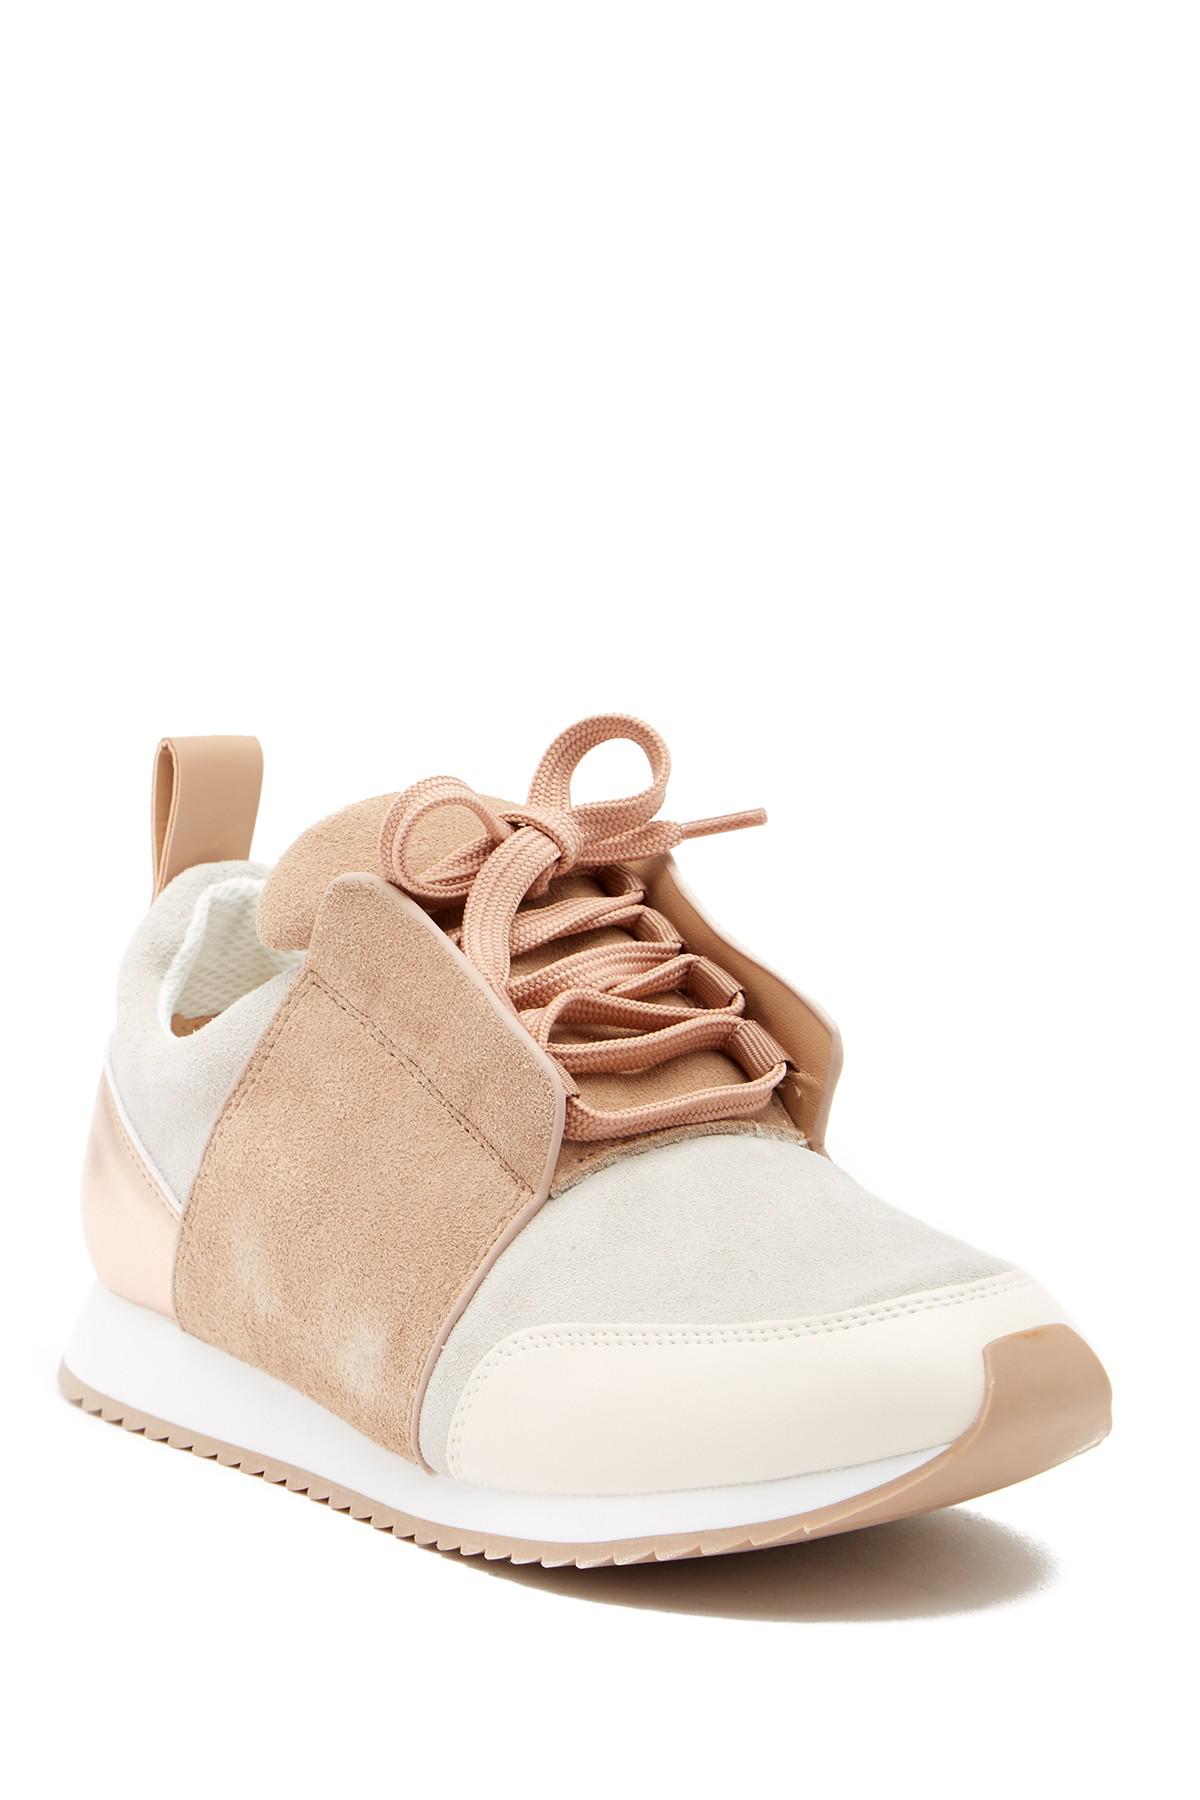 dolce vita suede sneakers